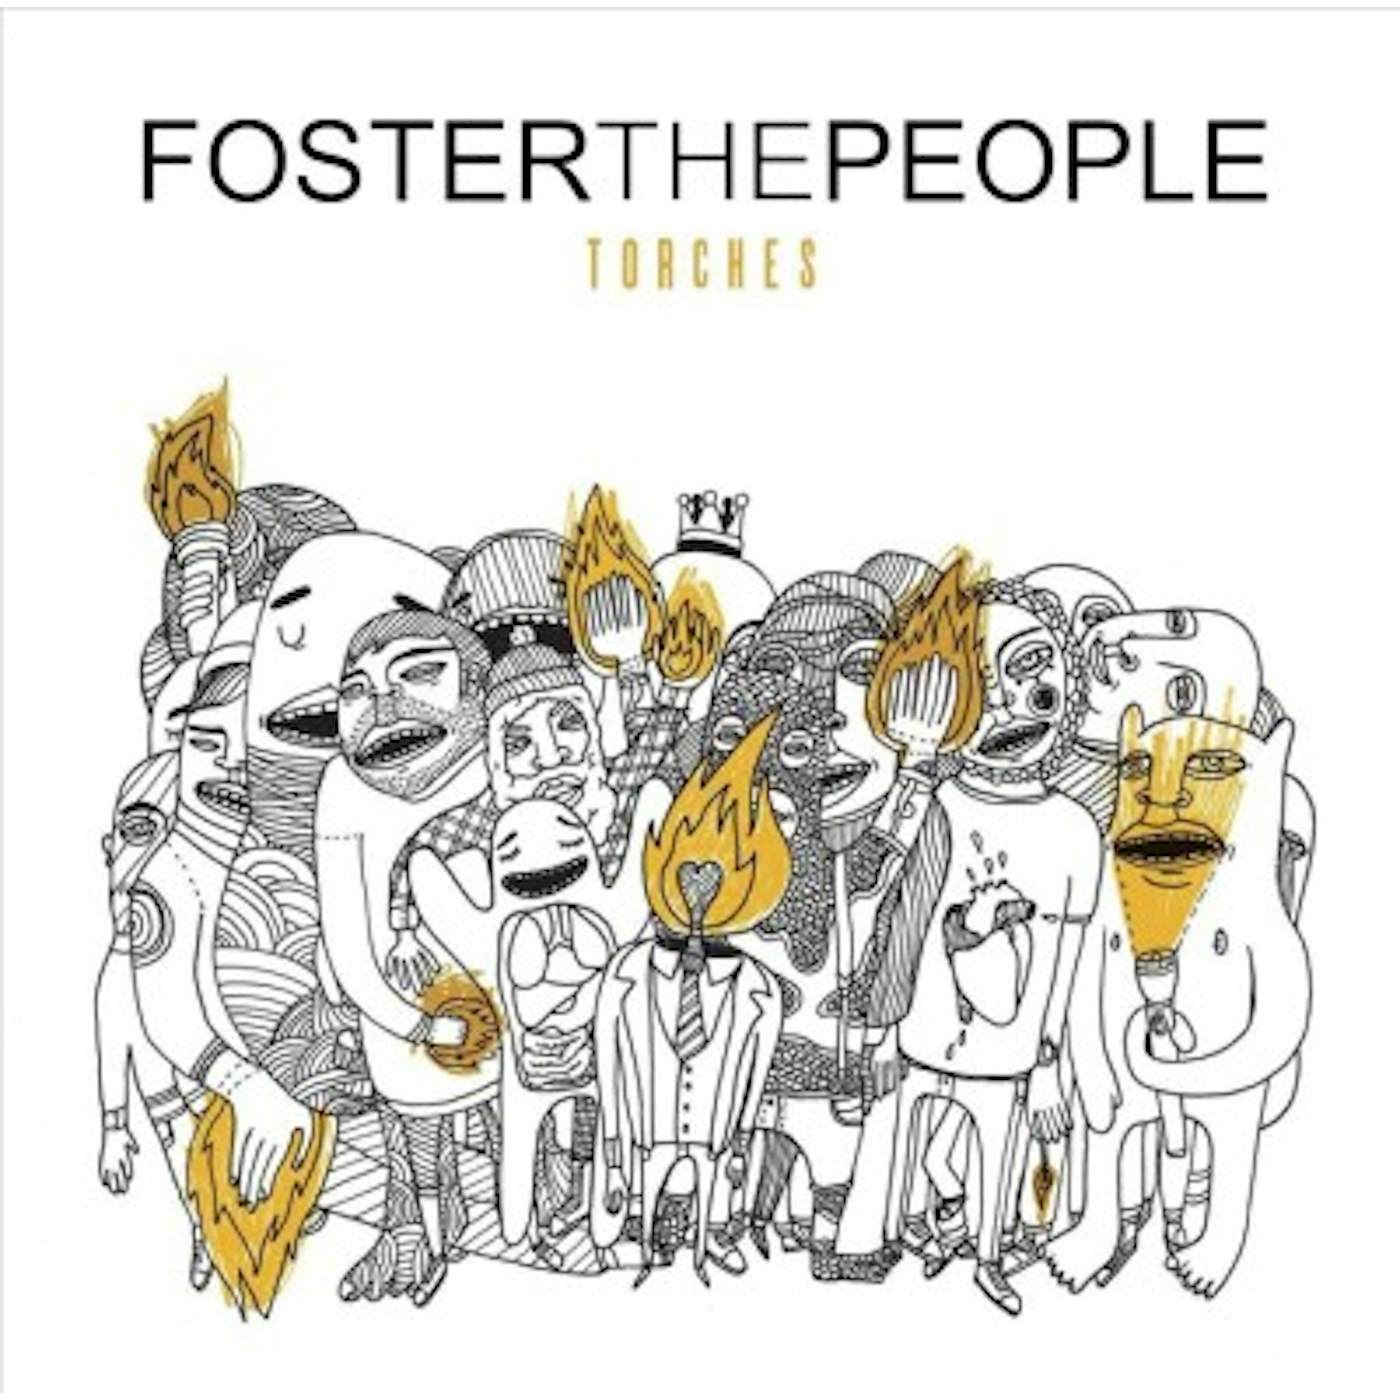 Foster The People TORCHES (DL CARD) Vinyl Record